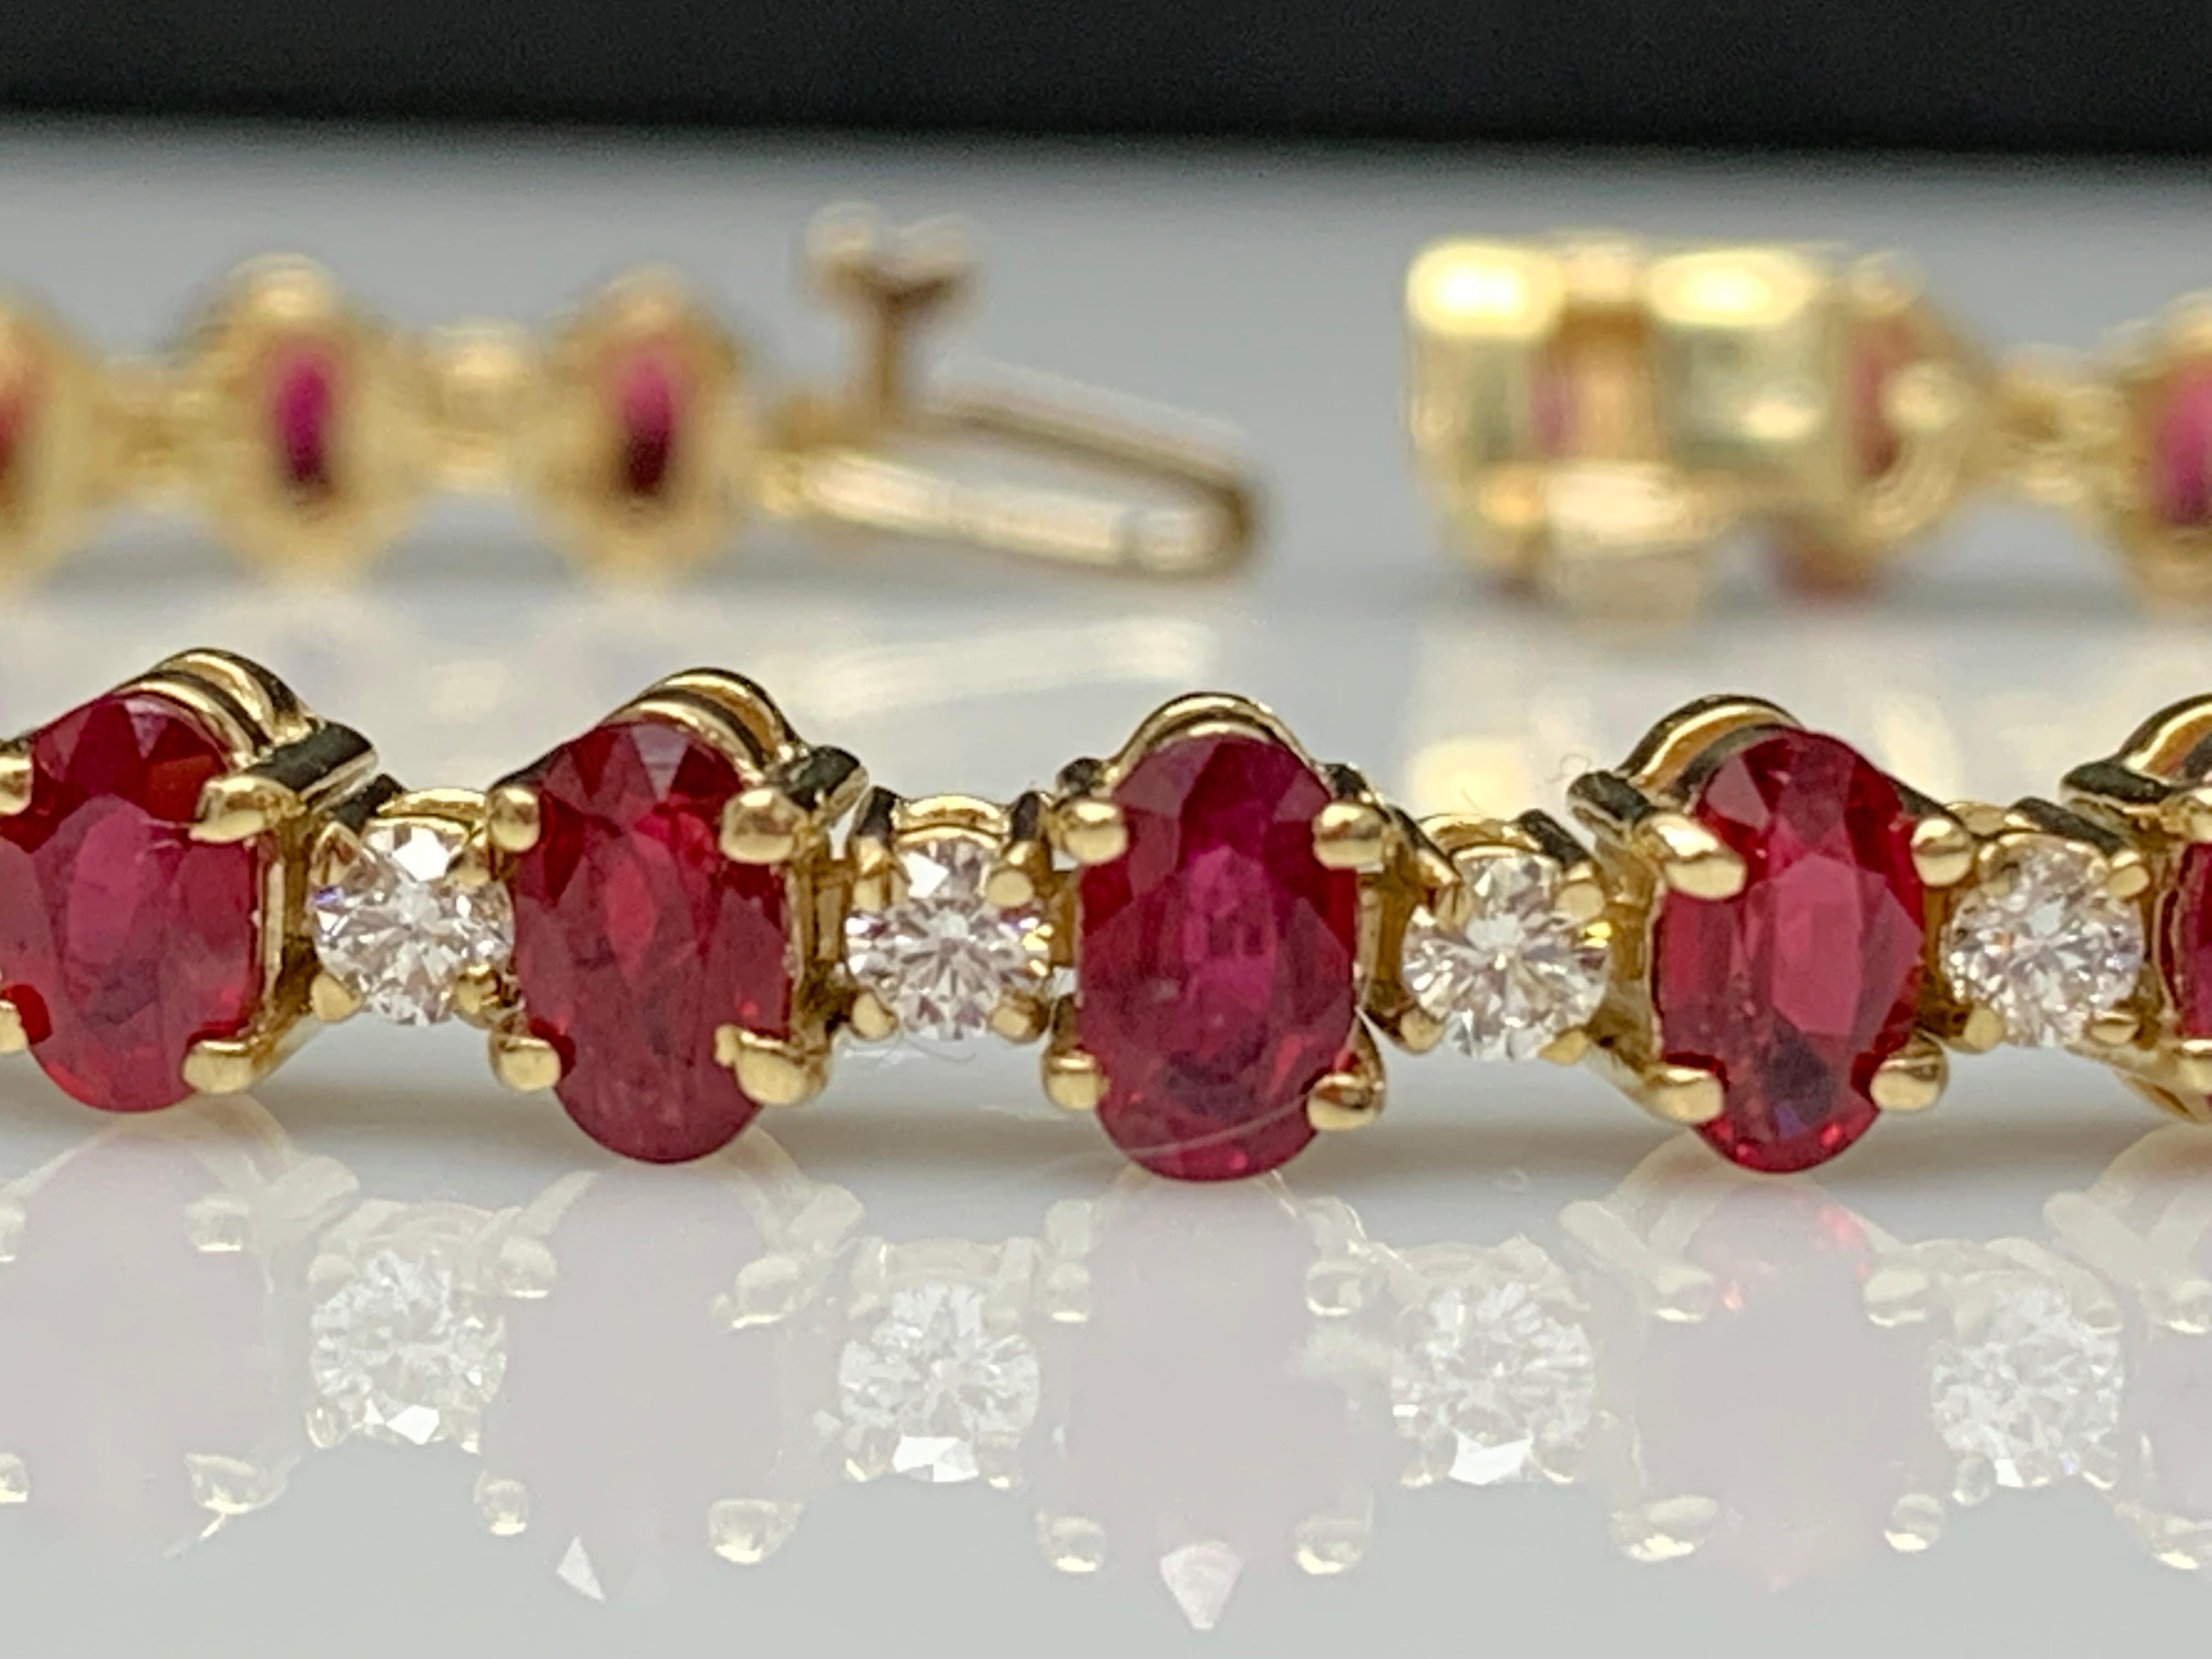 Grandeur 9.27 Carats Oval Cut Ruby and Diamond Bracelet in 14k Yellow Gold For Sale 3